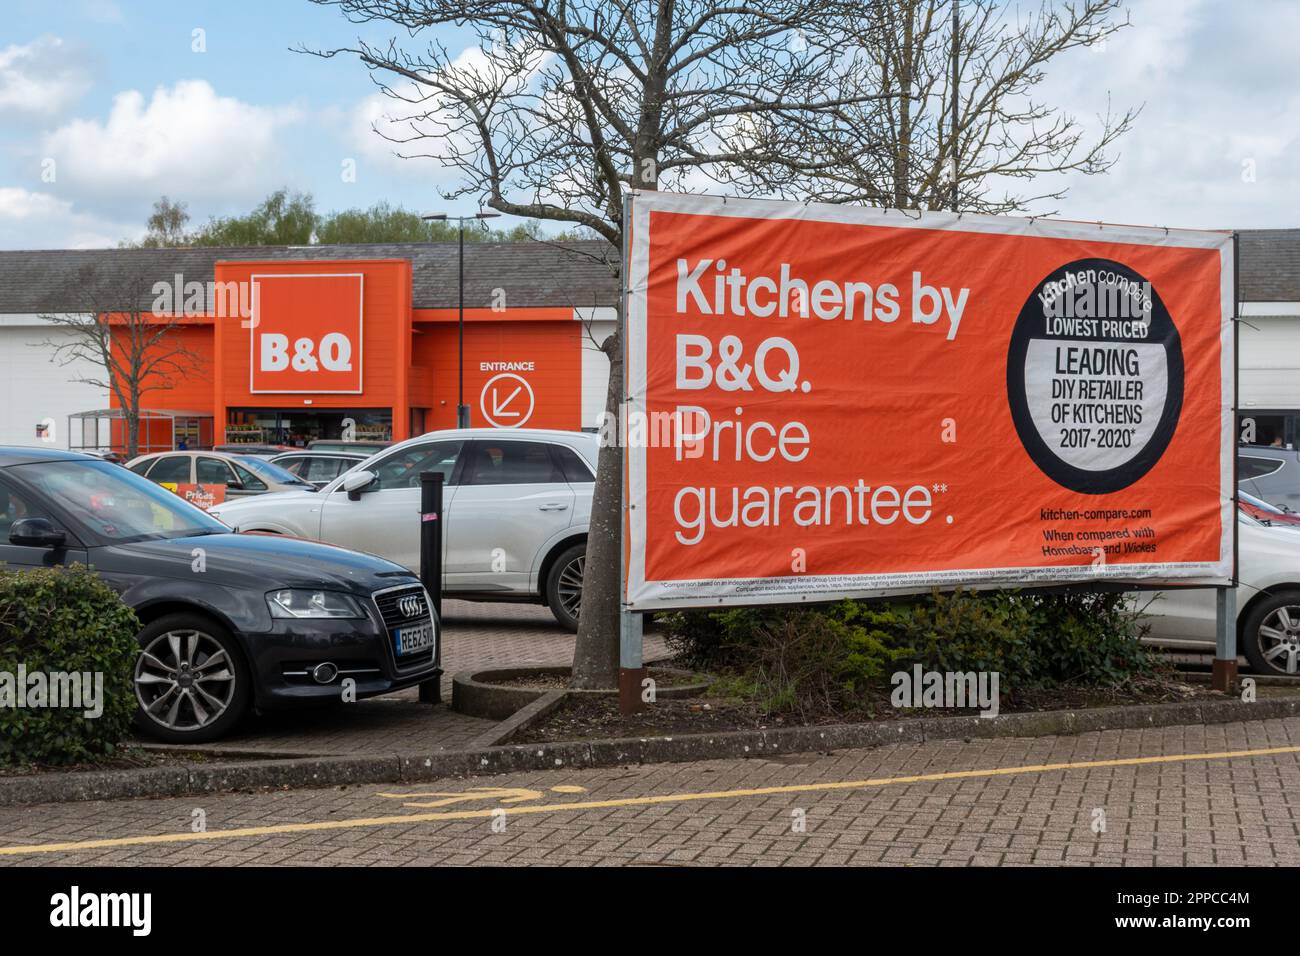 B&Q shop front, and banner sign about kitchens, England, UK. DIY and home improvement store Stock Photo